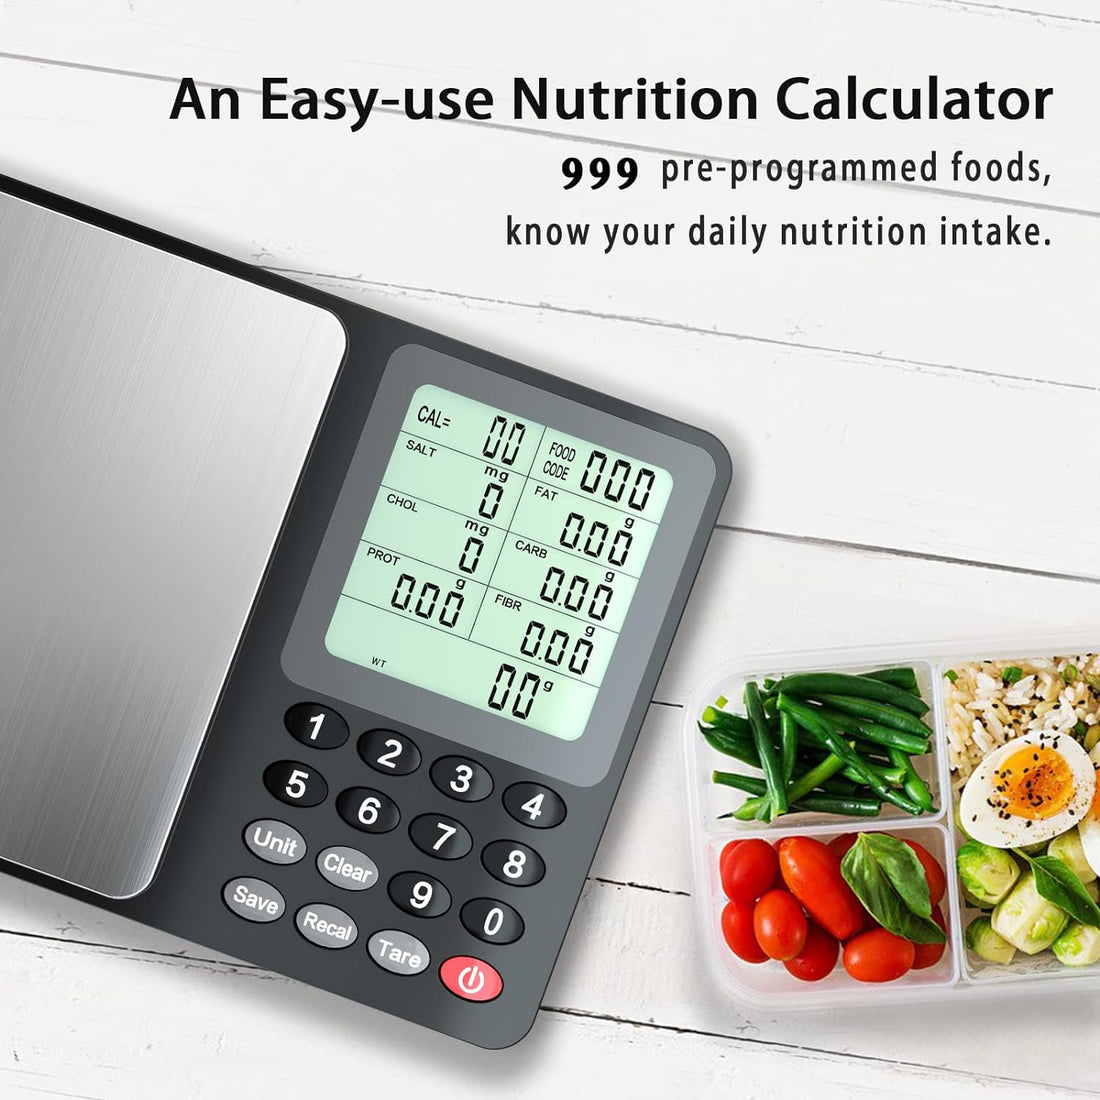 Nutrition Food Scale, Digital Food Scale for Weight Loss, Calculating Food Facts, Macro, Calorie, Meal Prep, Portion Control, Stainless Steel - HealthFulBeautyLife